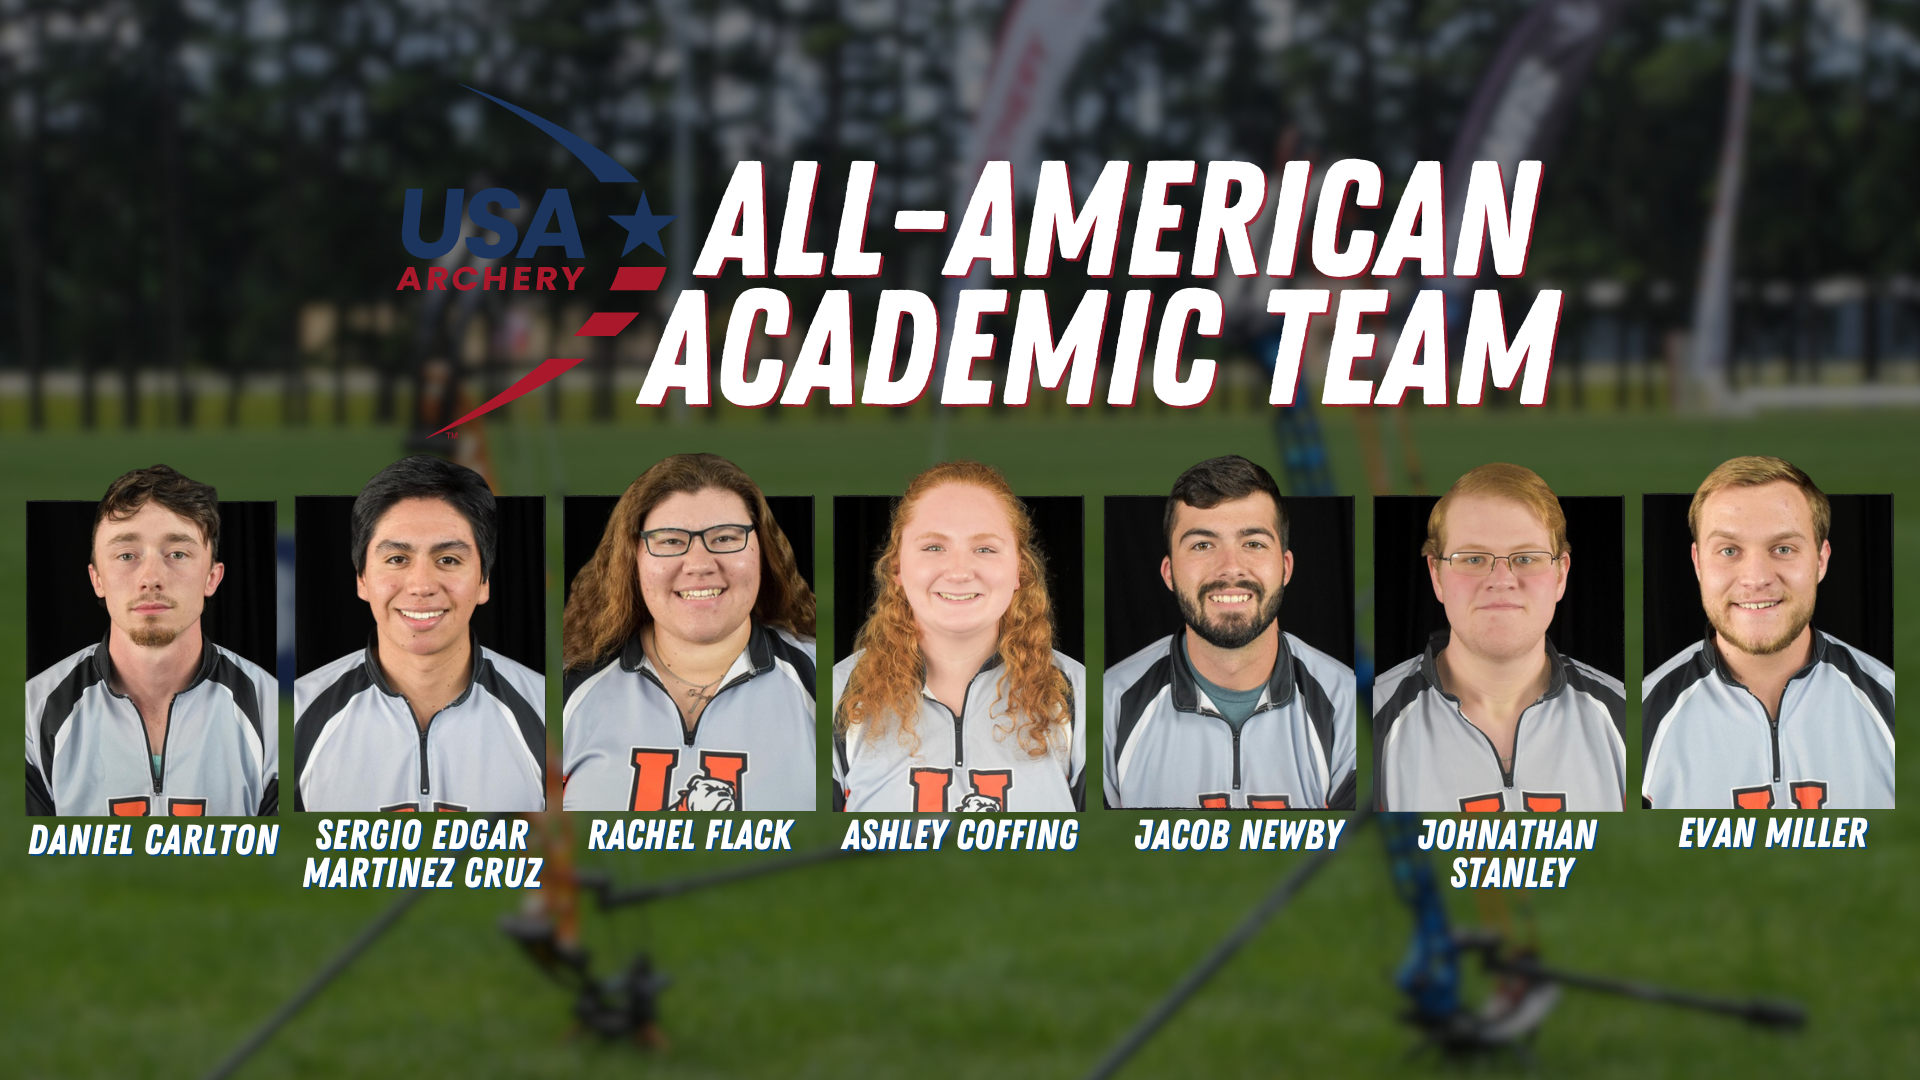 Seven members of Union archery earn USA Archery All-American Academic honors